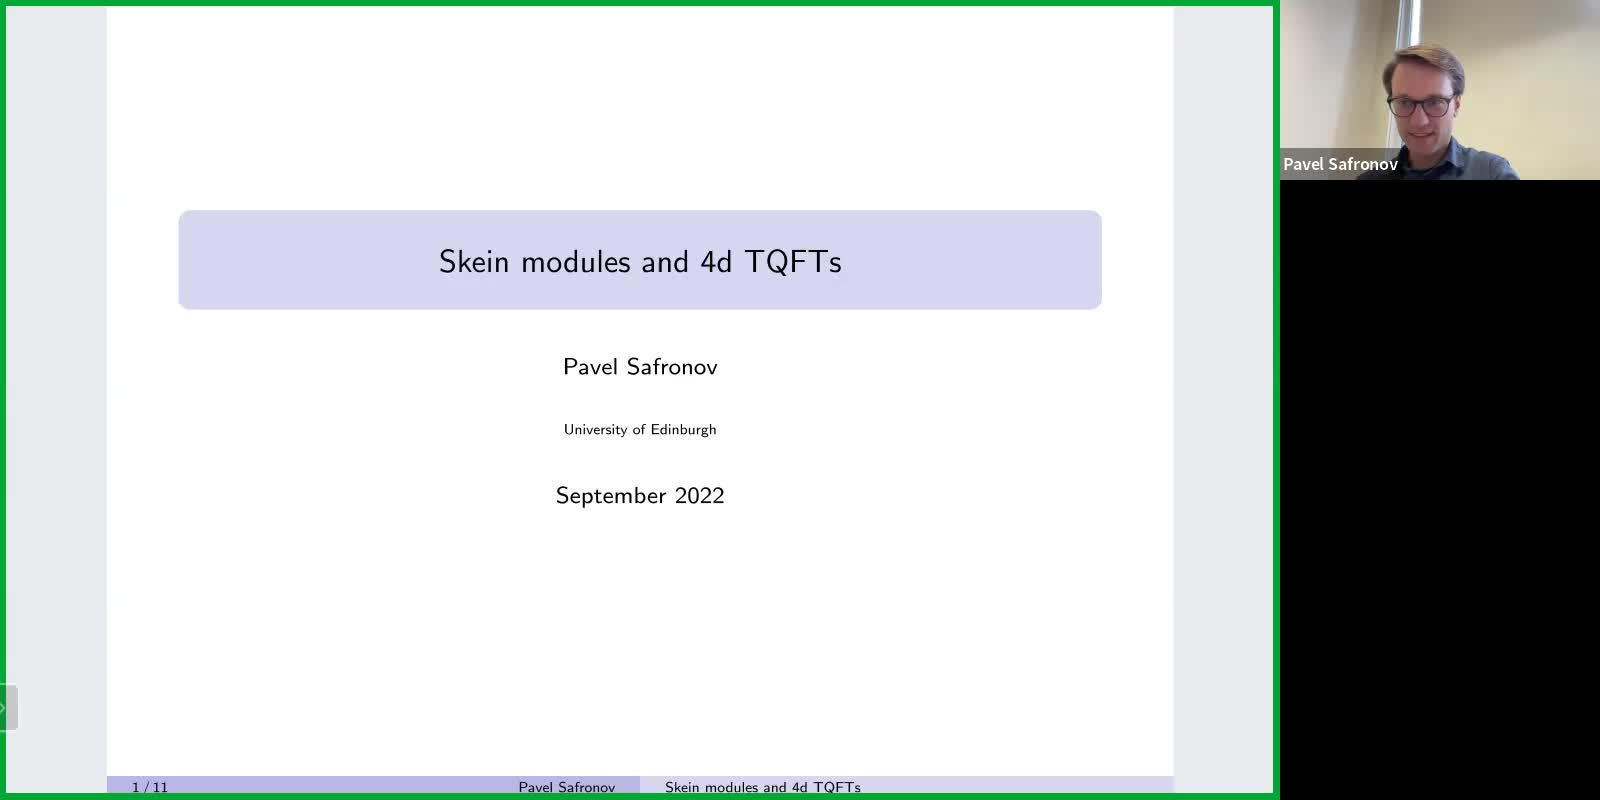  2022.09.21 Skein modules and 4d TQFTs